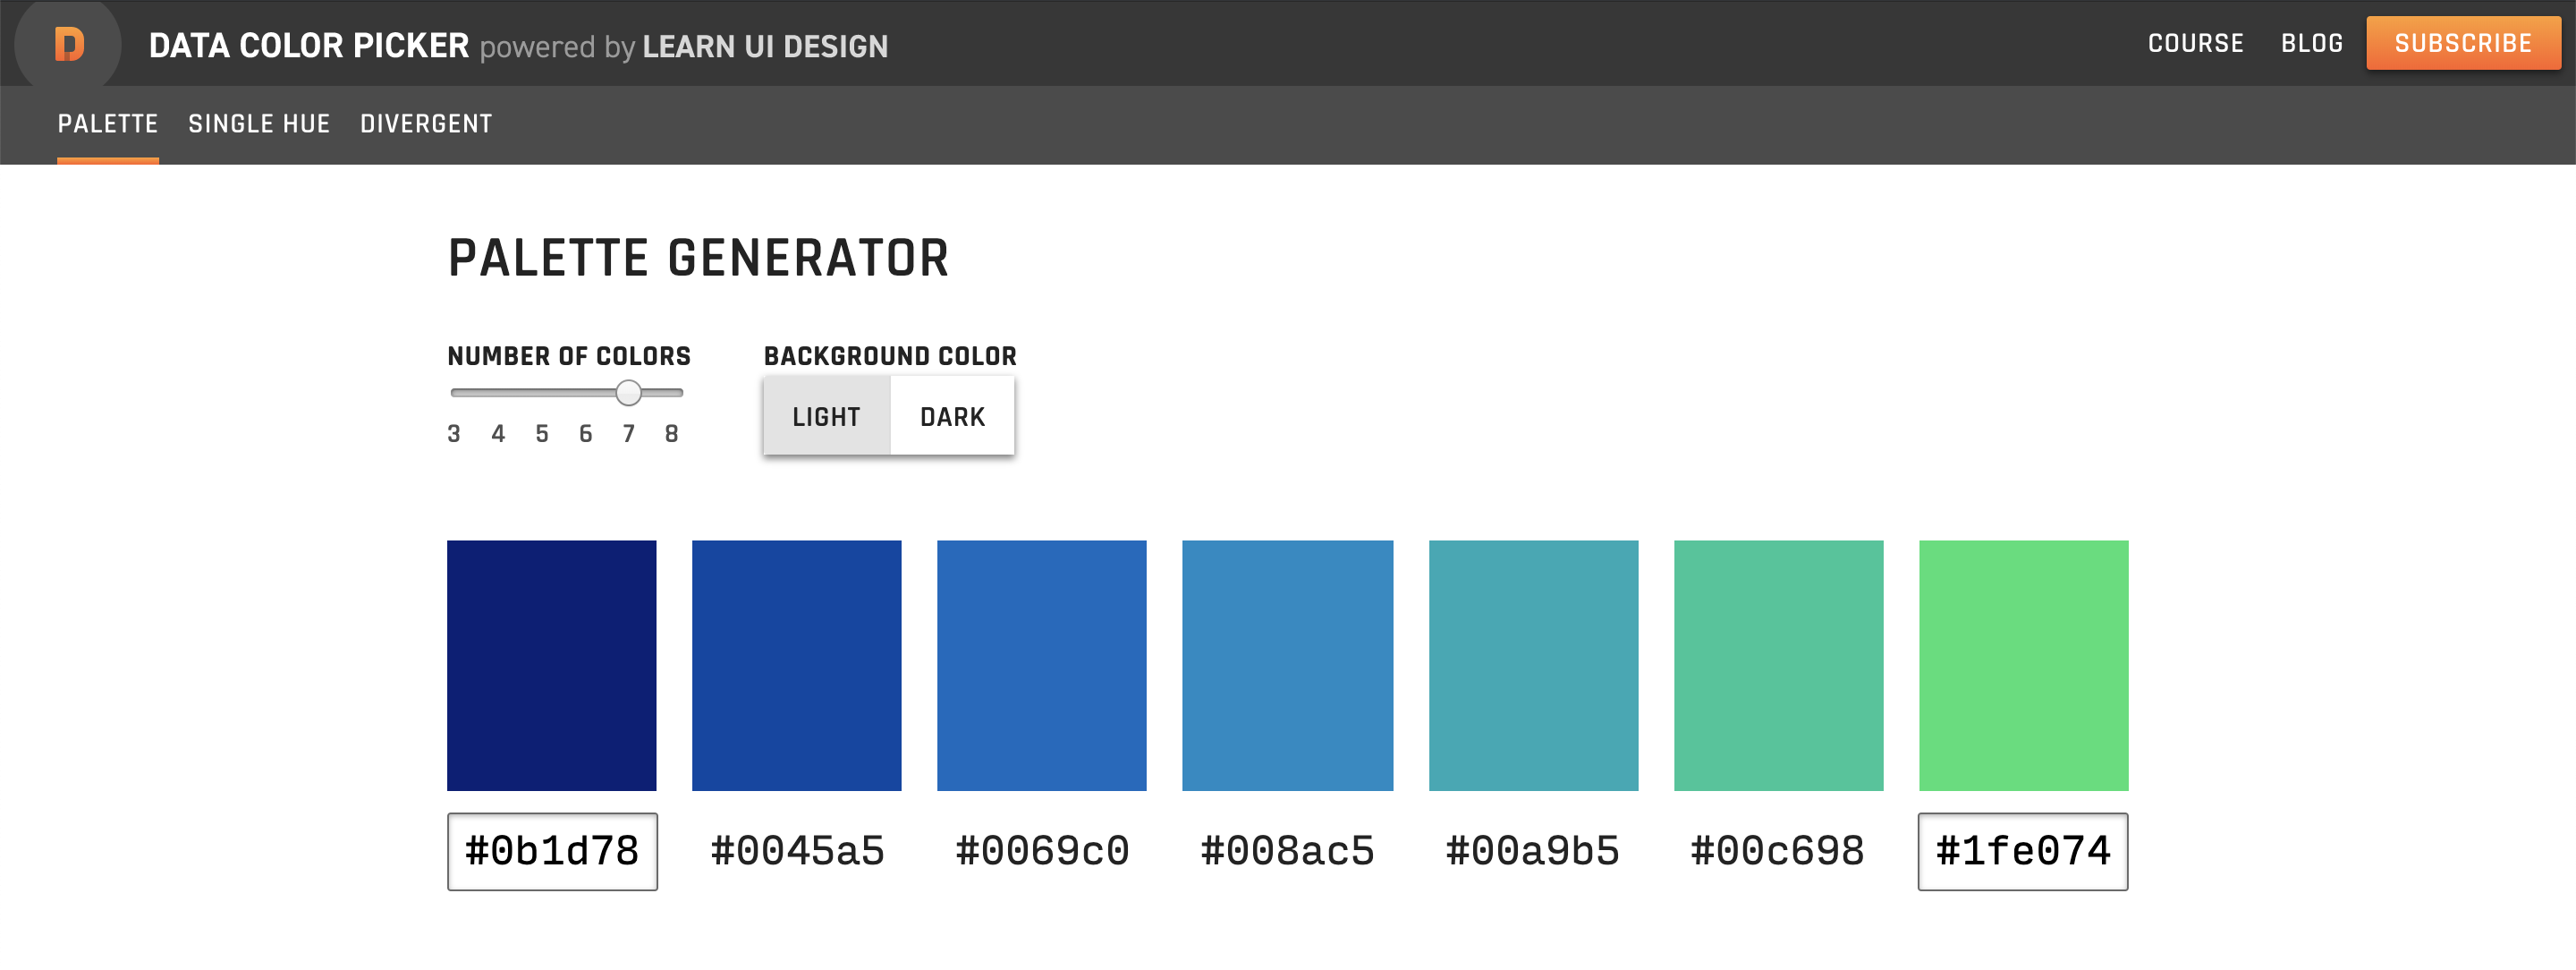 Screenshot of the Data Color Picker site with a blue-to-green sequential palette.